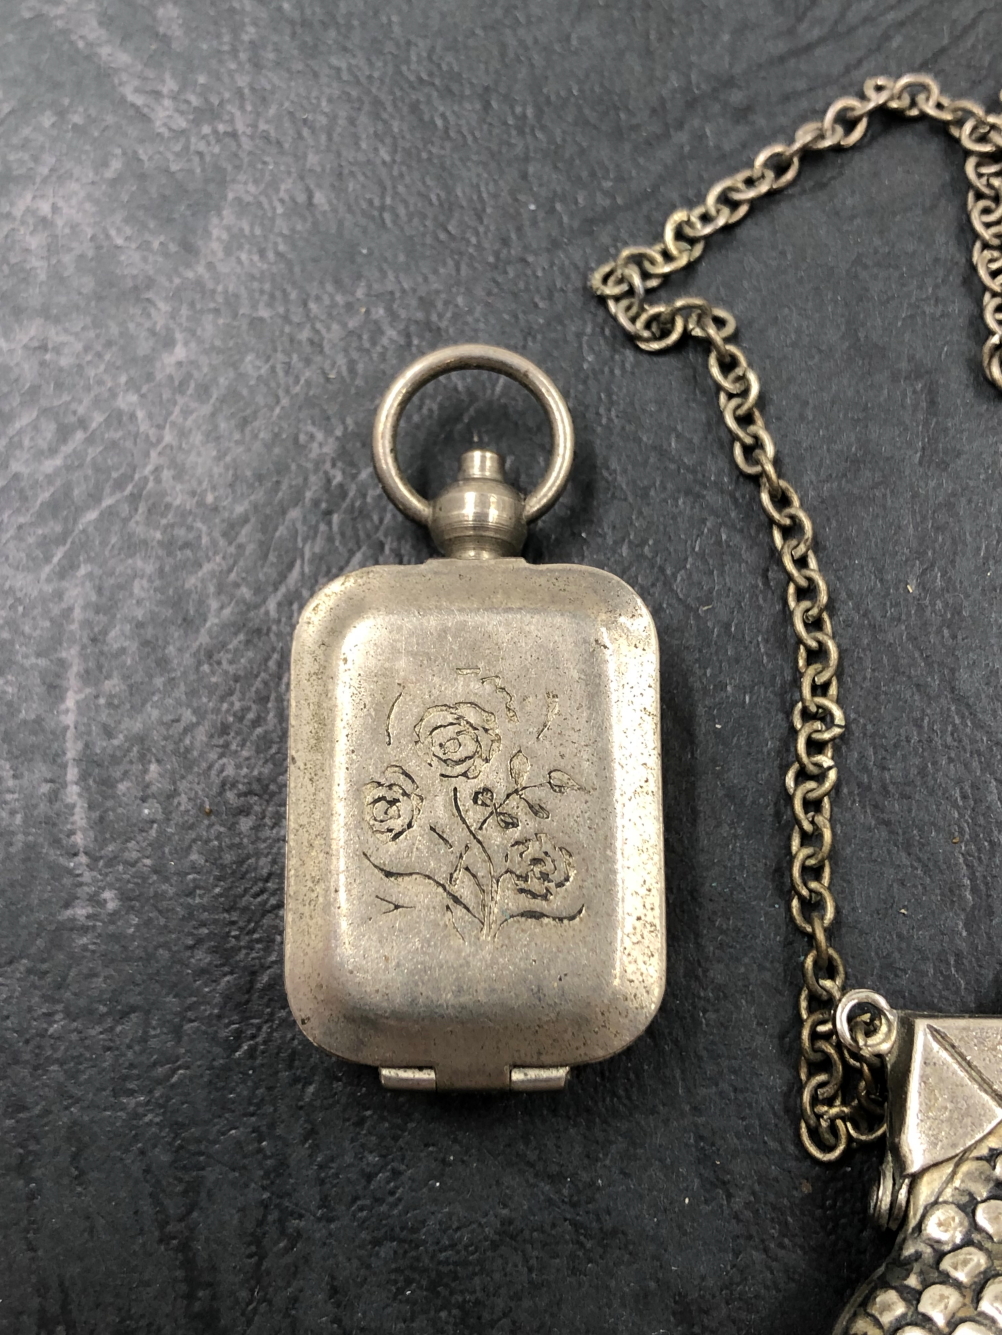 A HALLMARKED SILVER SNUFF BOX WITH SUSPENSION RING, A NICKEL PURSE WITH CHAIN, AND A NICKEL MONOGRAM - Image 2 of 4